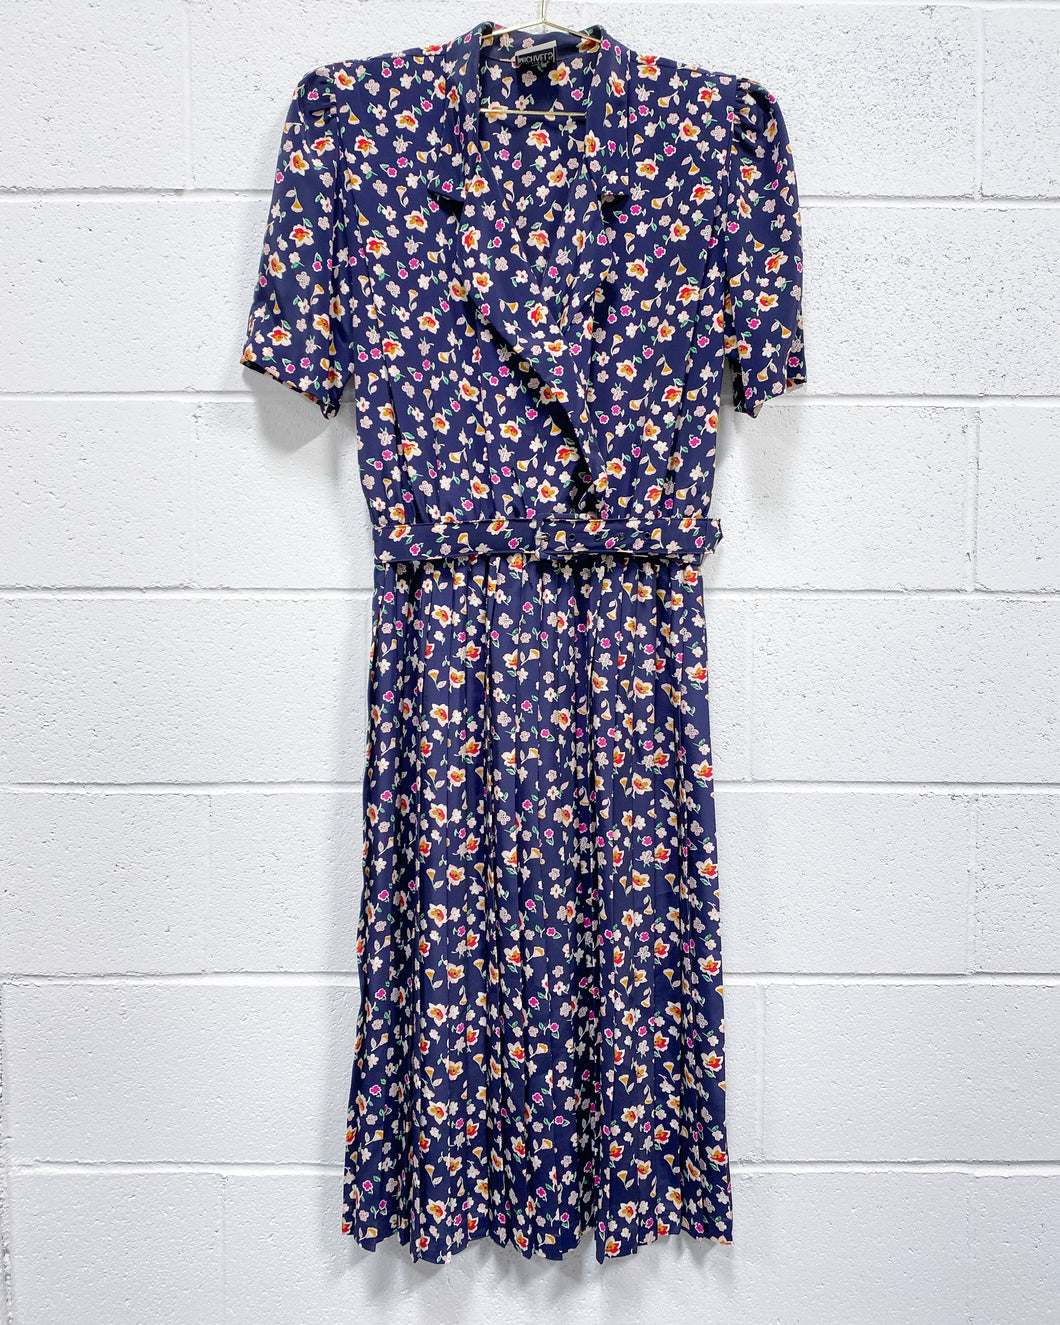 Vintage Navy Blue Dress with Flowers